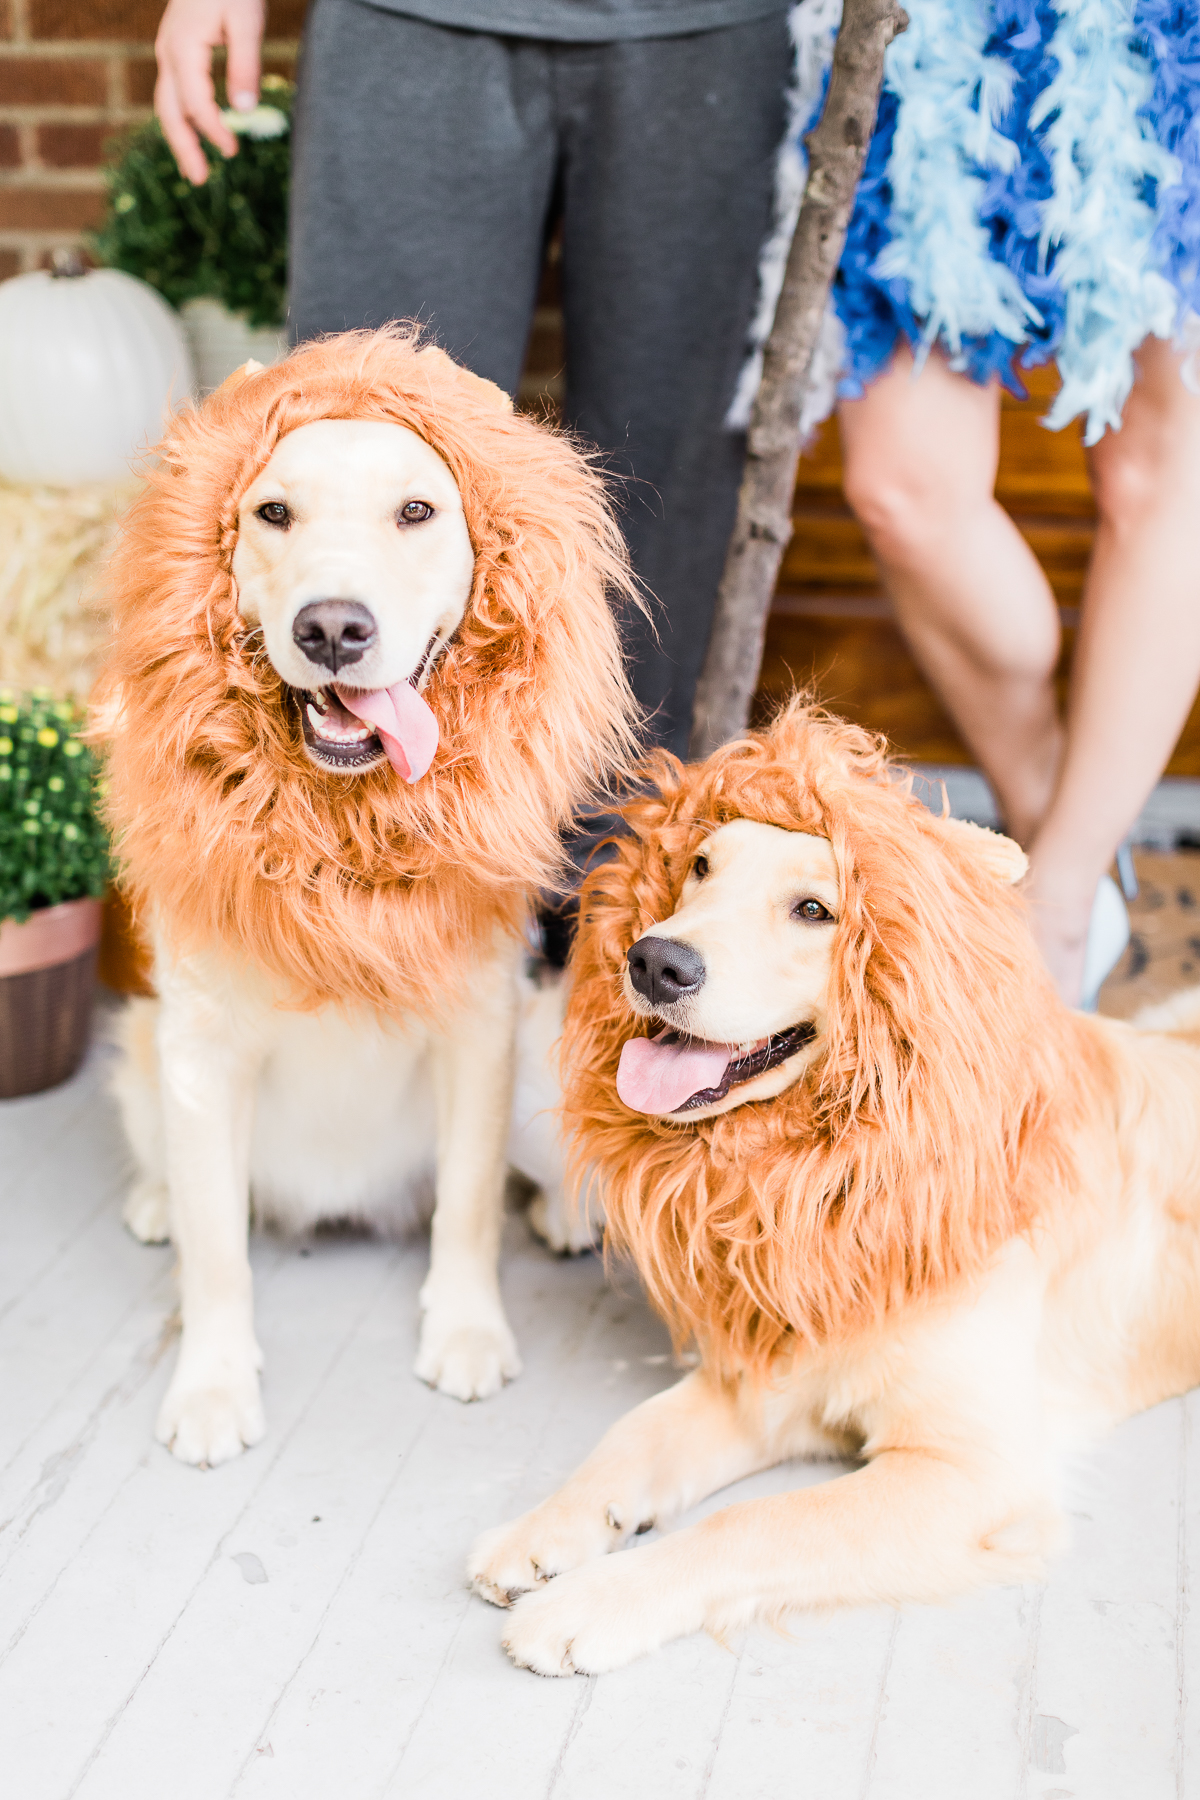 Best of October: The Top 10 Things I Loved in October 2019 by popular affordable fashion blogger Stephanie Ziajka on Diary of a Debutante, lion dog costume, golden retrievers in lion costumes, pet halloween costumes, lion king pet costumes